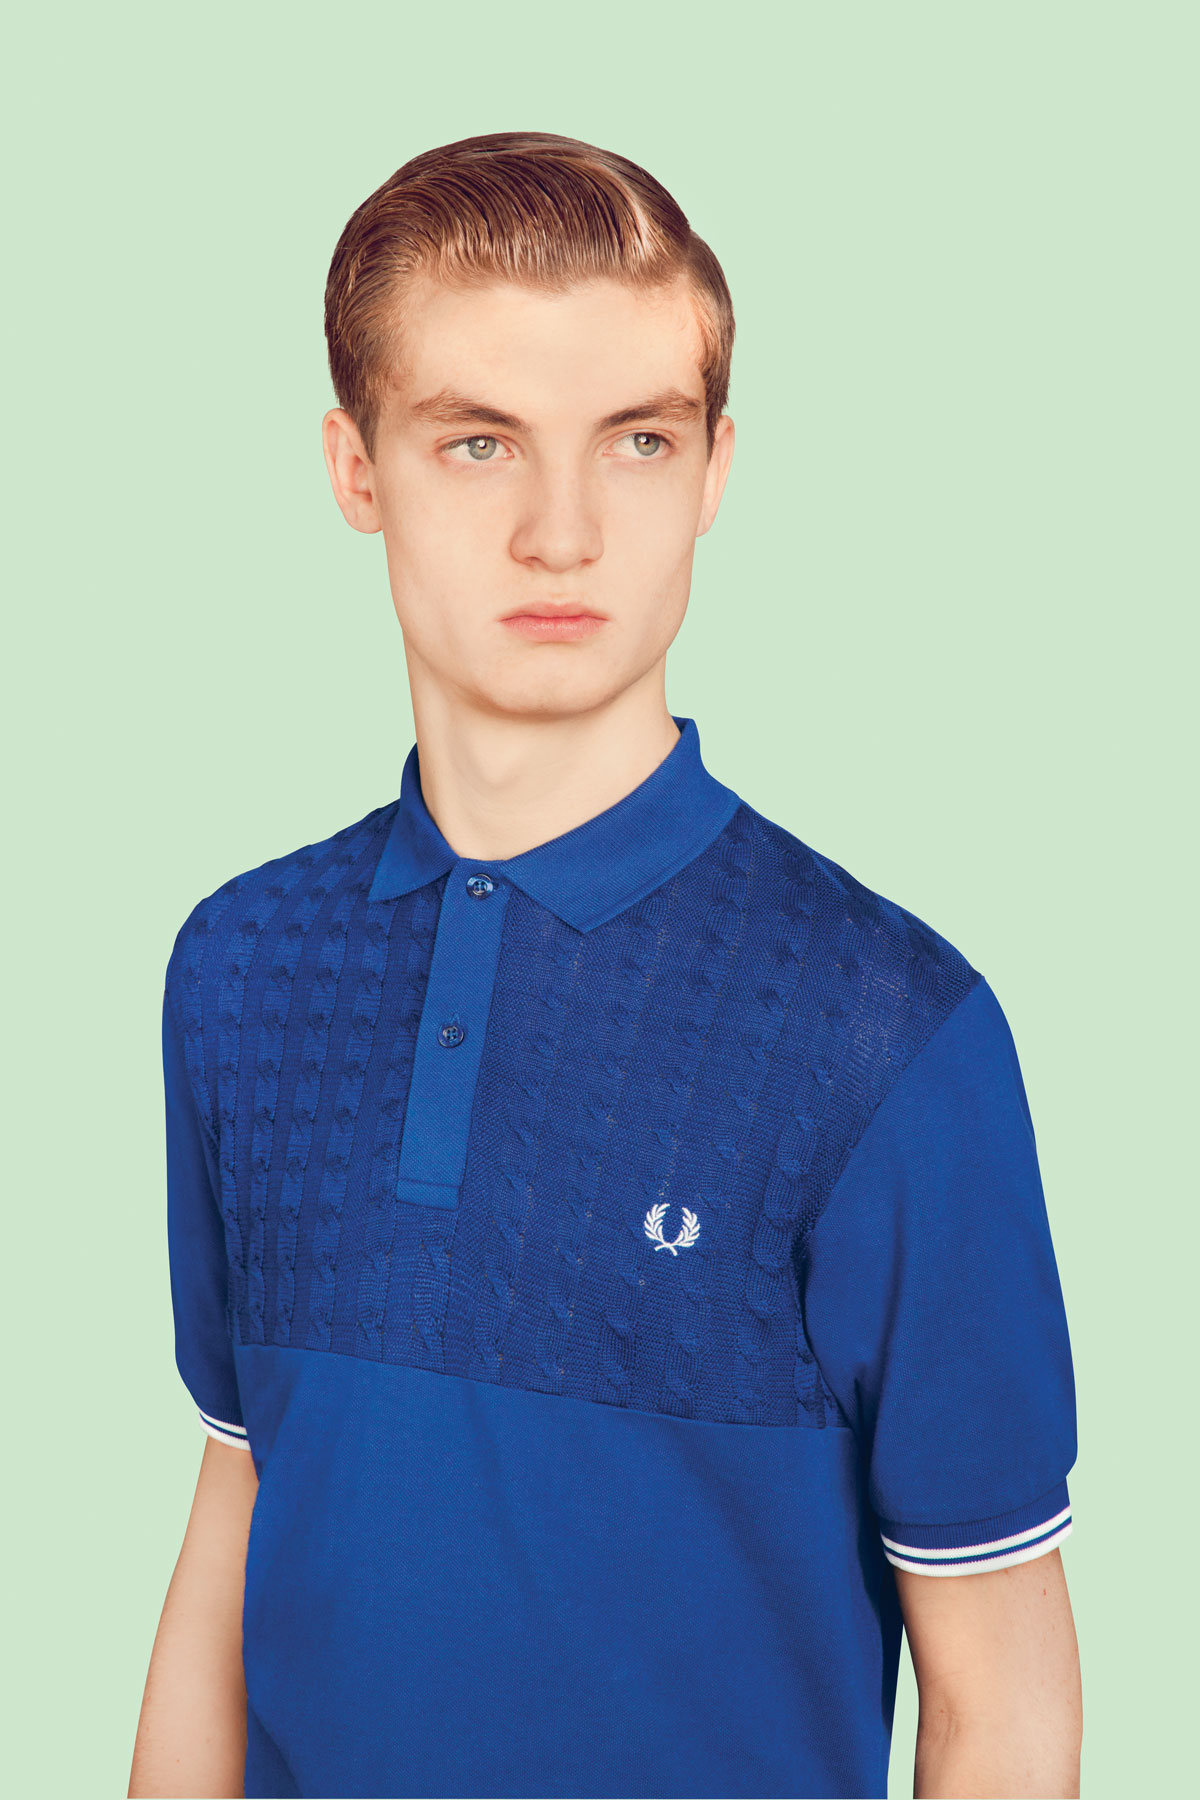 BRITISH KNITTING BY FRED PERRY